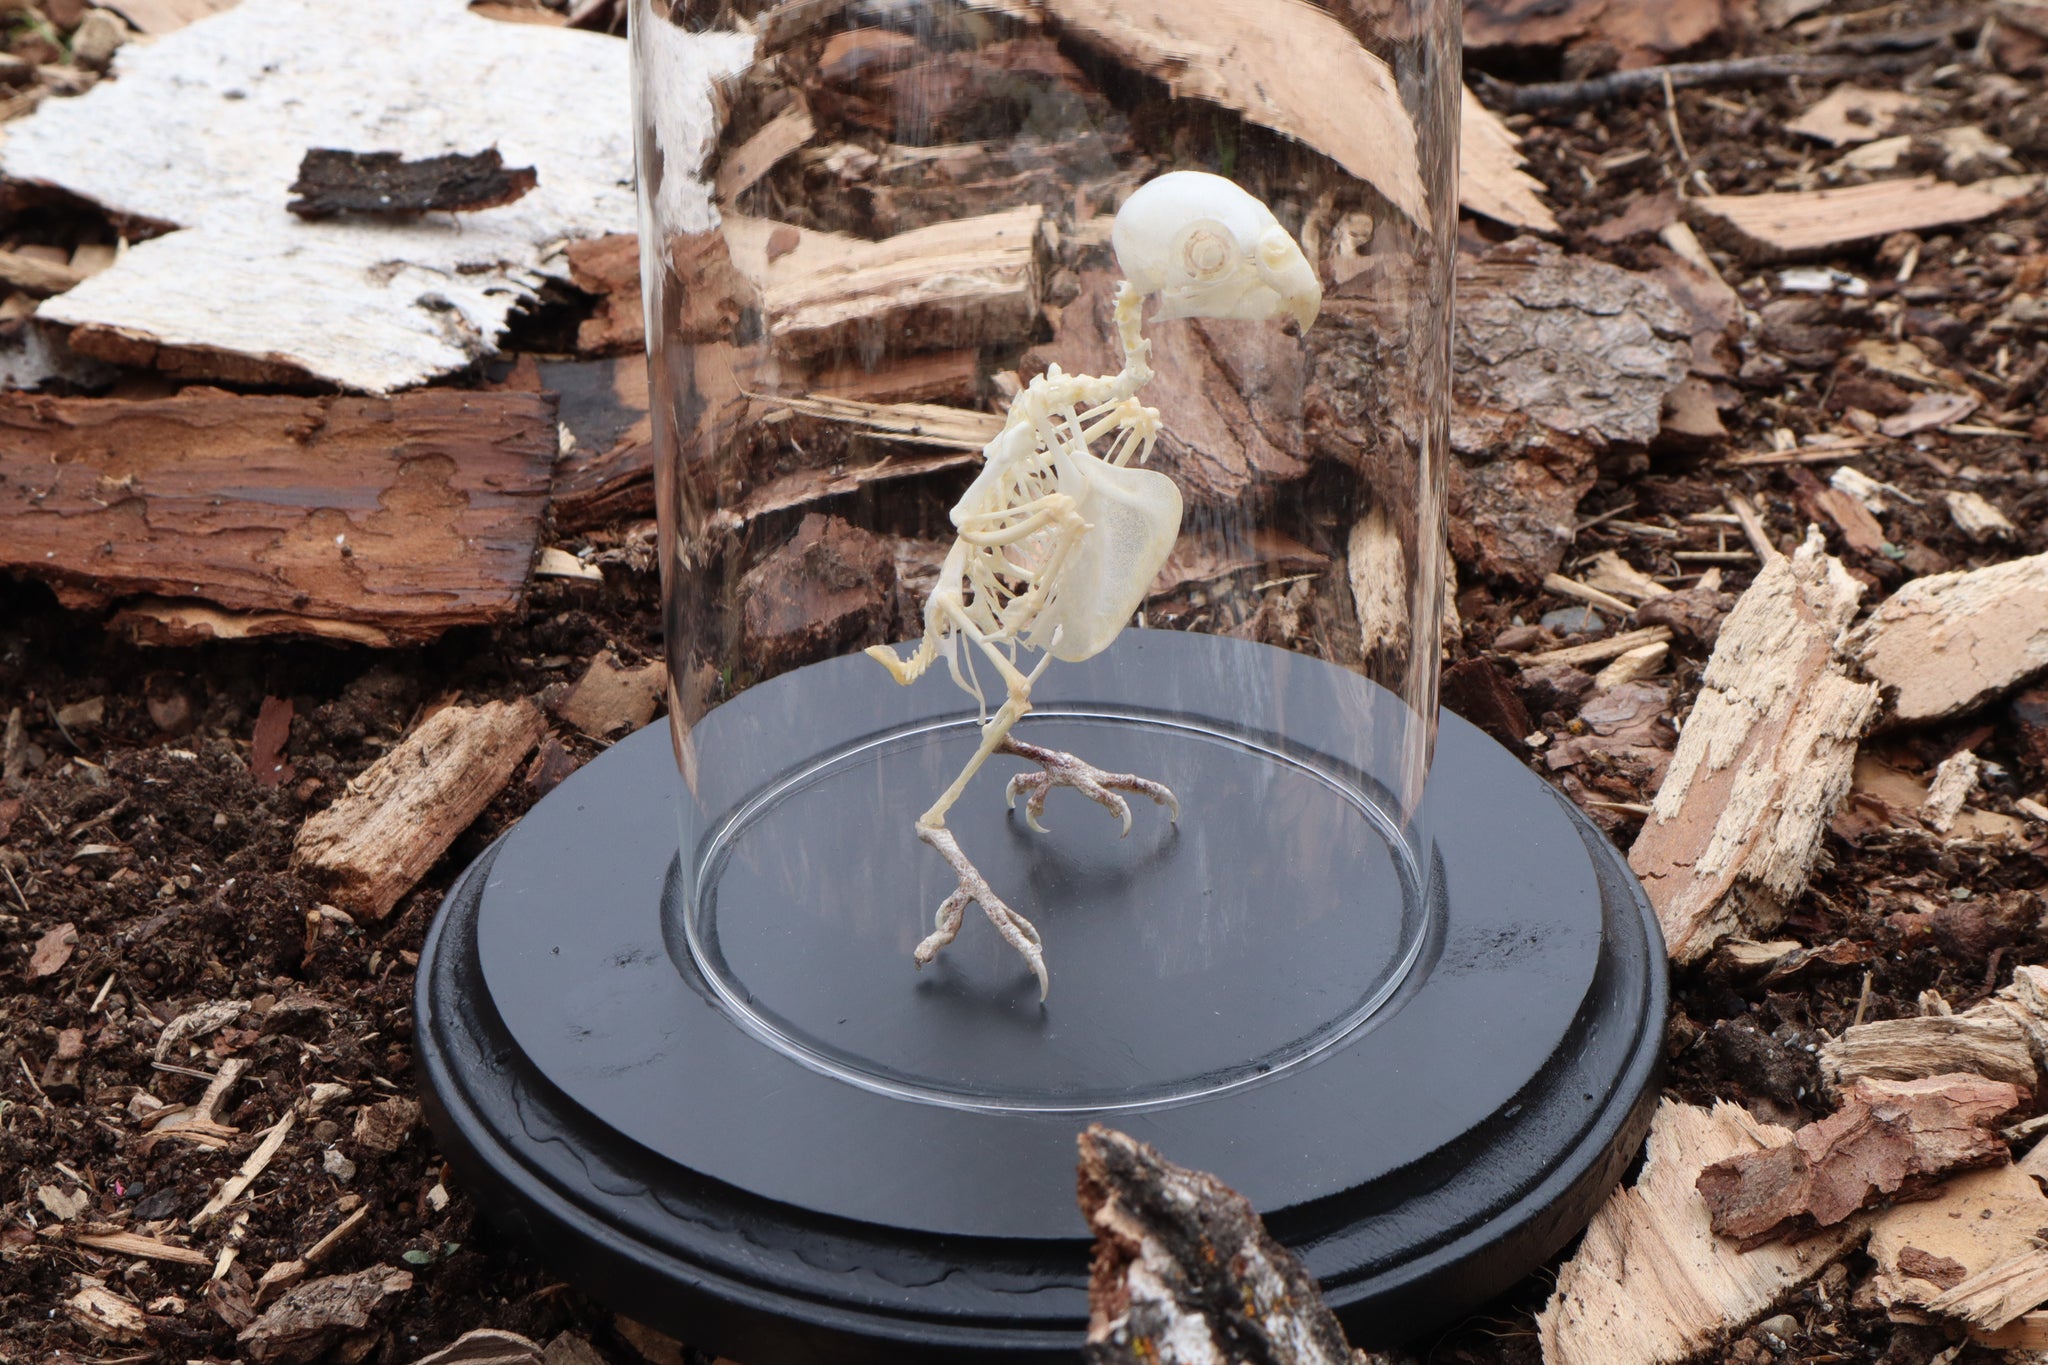 Articulated Parakeet Skeleton with Sclerotic Rings